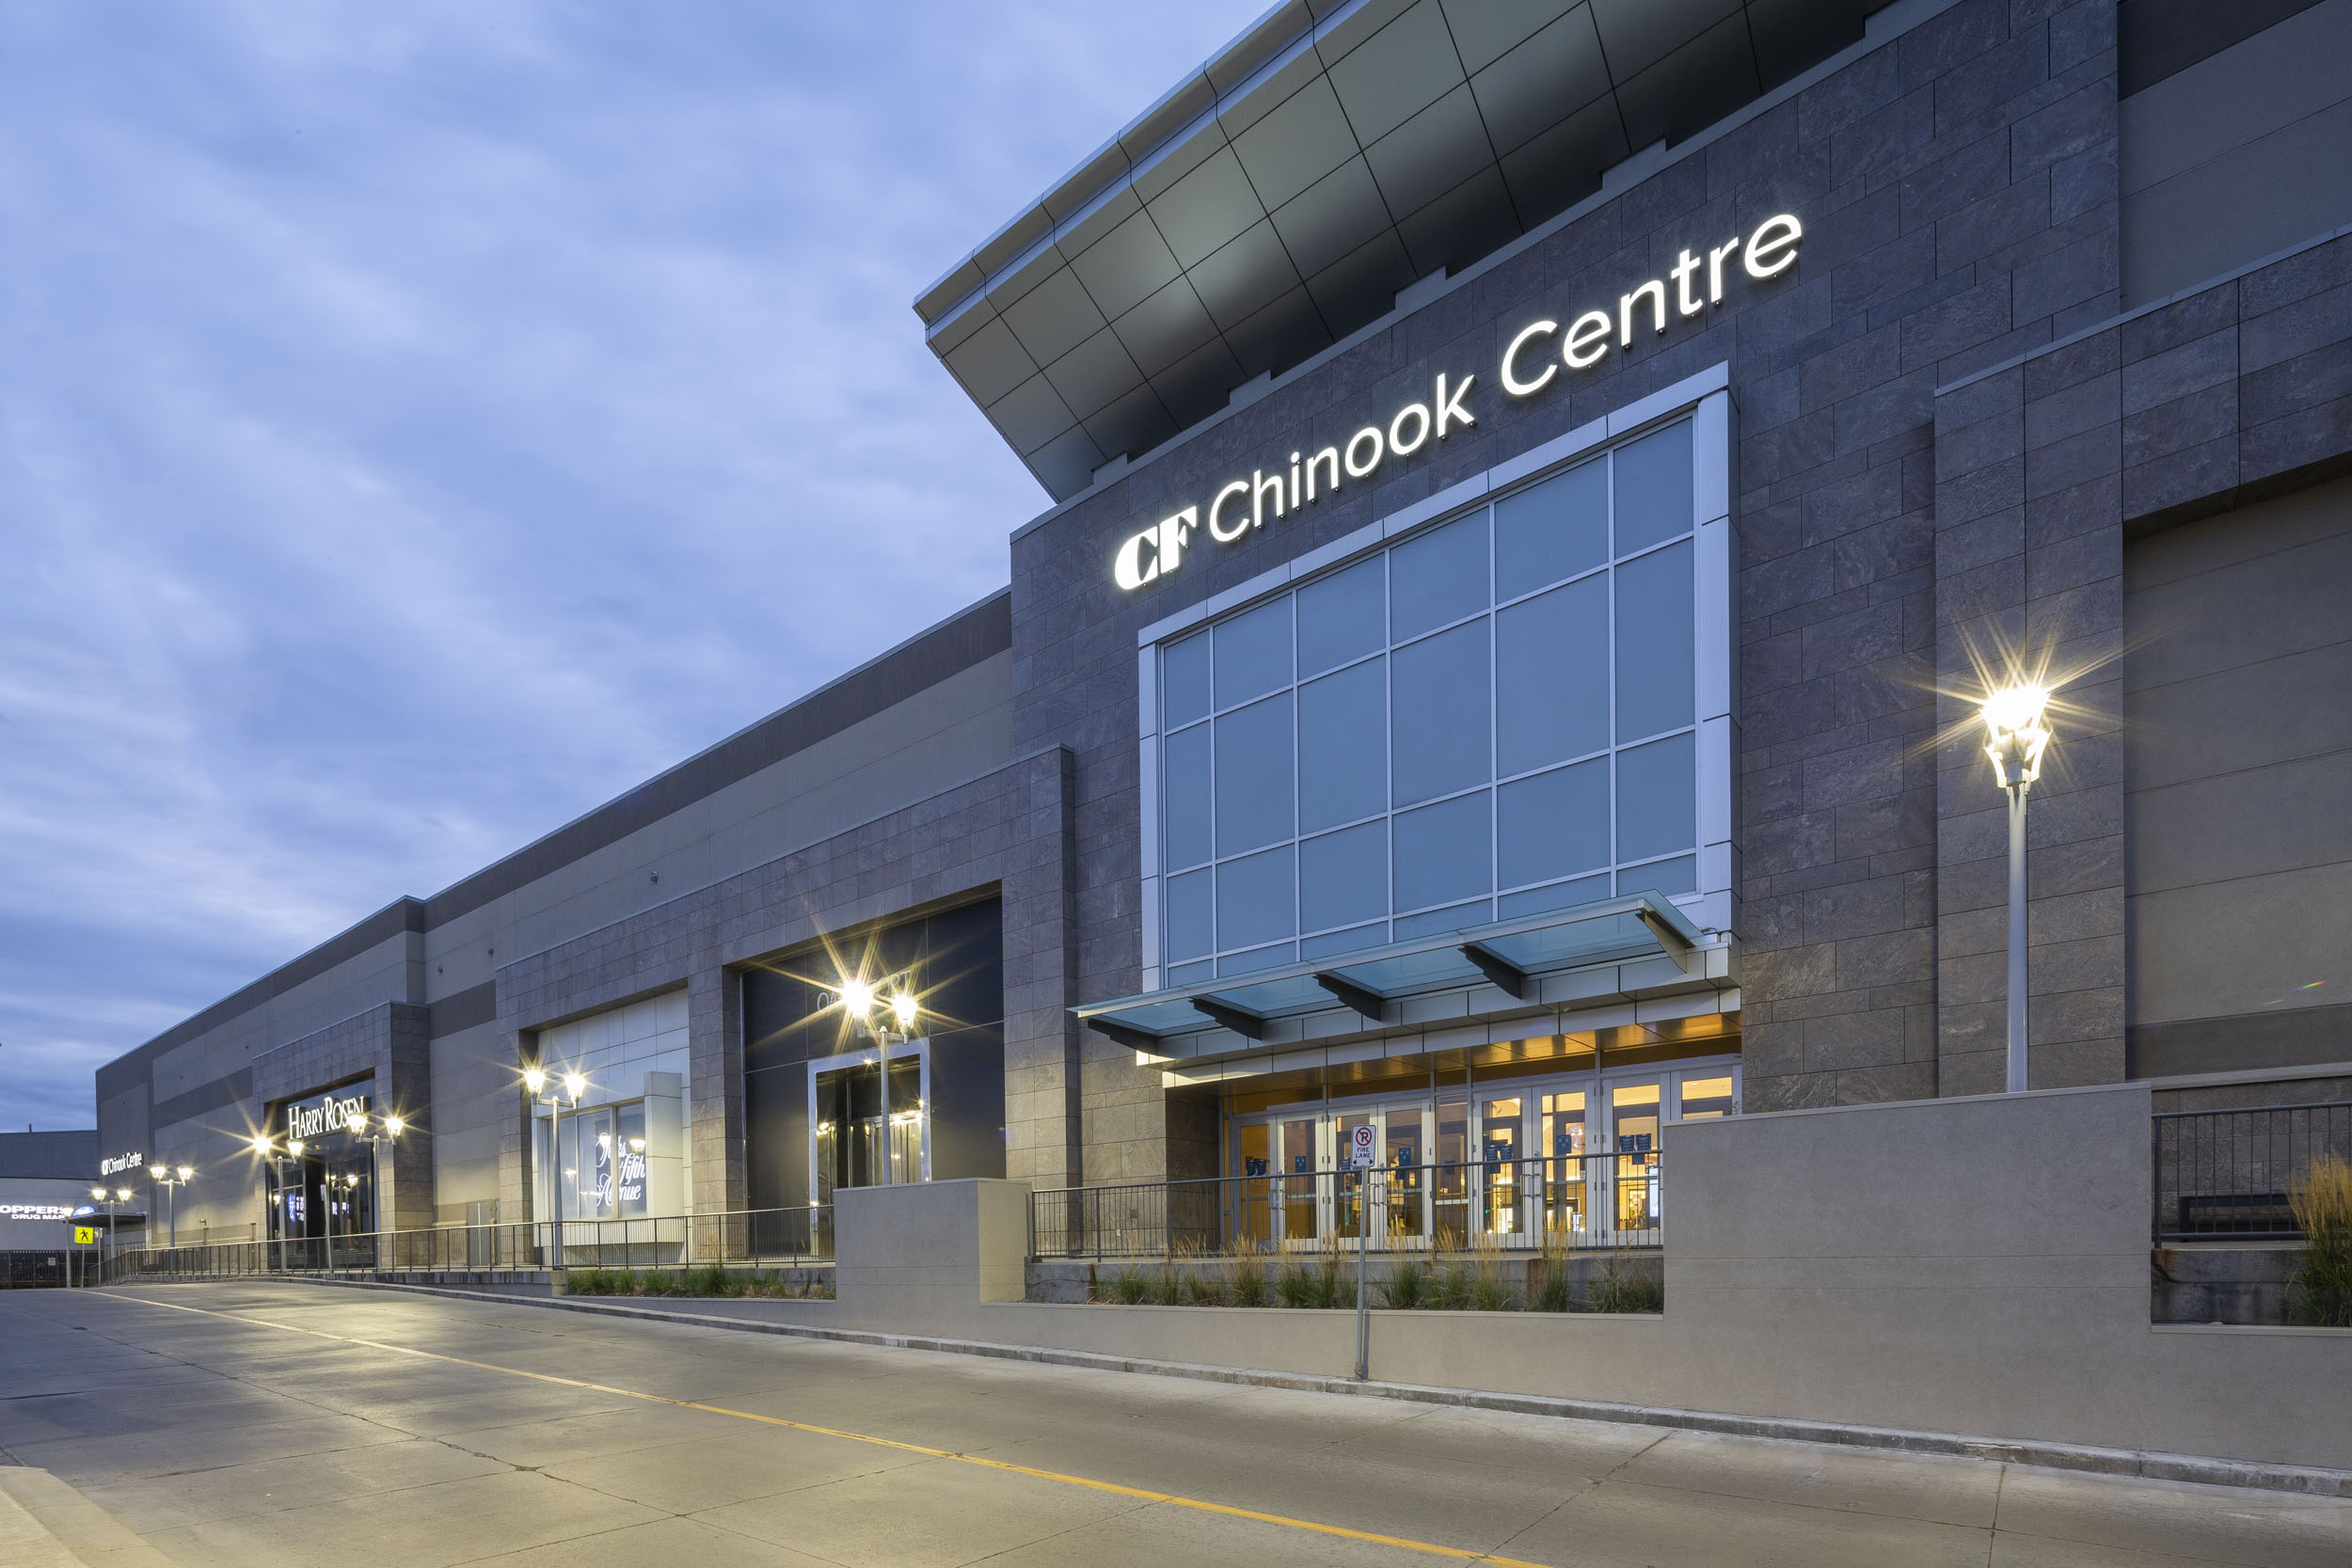 CF CHINOOK CENTRE - 67 Photos & 78 Reviews - 6455 MacLeod Trail SW, Calgary,  Alberta - Shopping Centres - Phone Number - Yelp